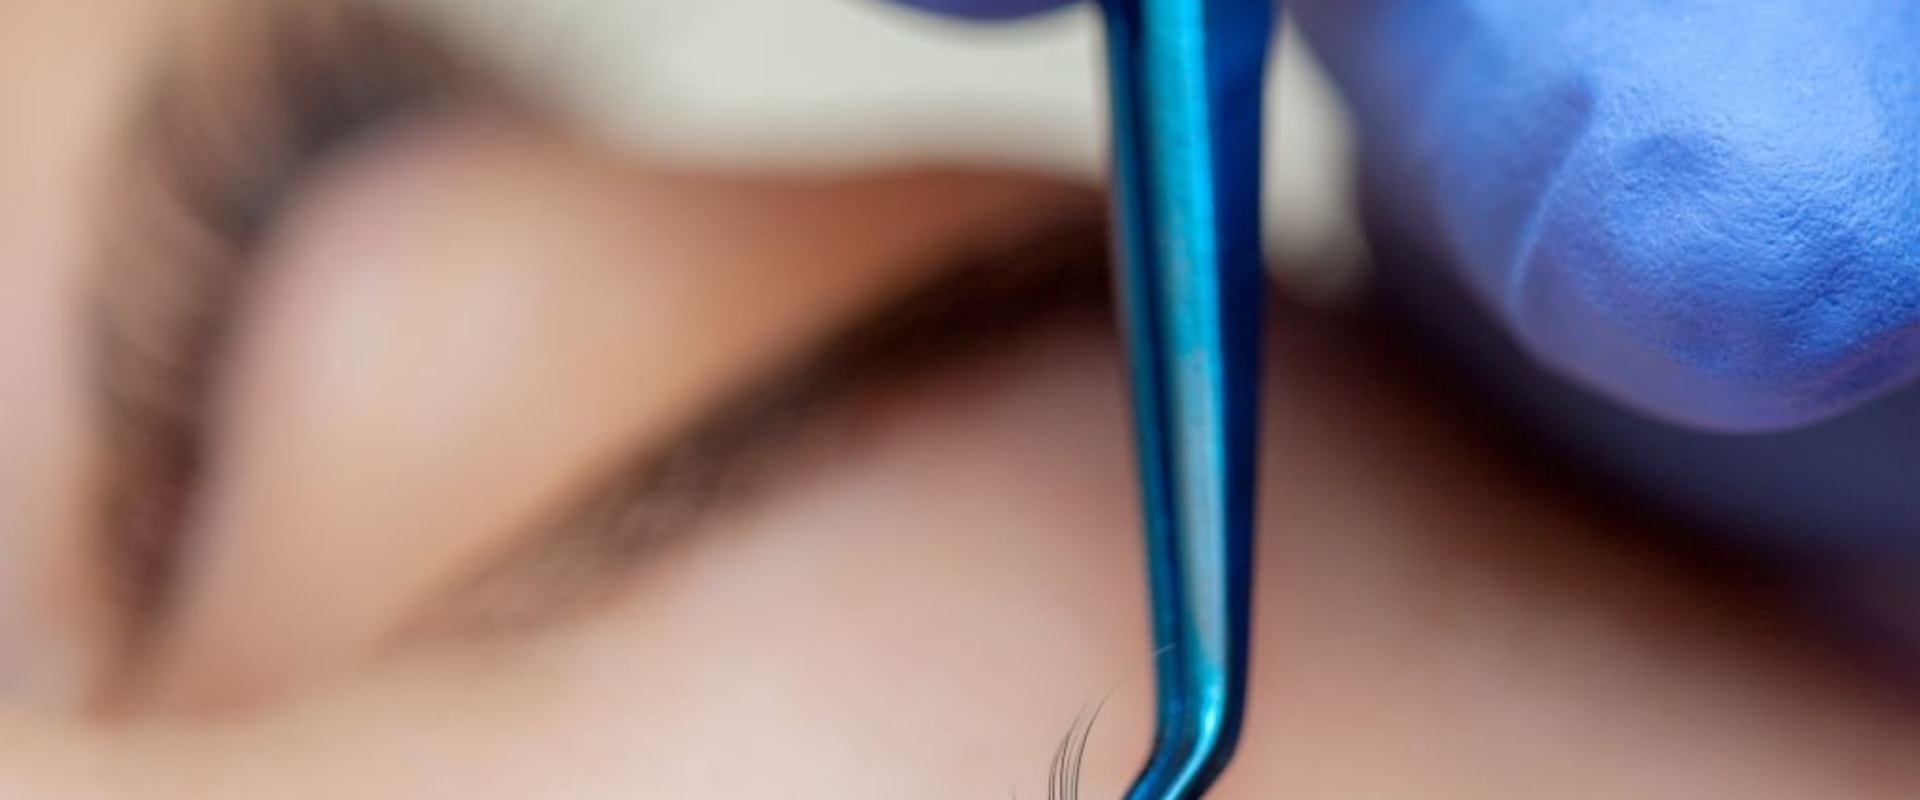 Can your eyelashes still grow with eyelash extensions?